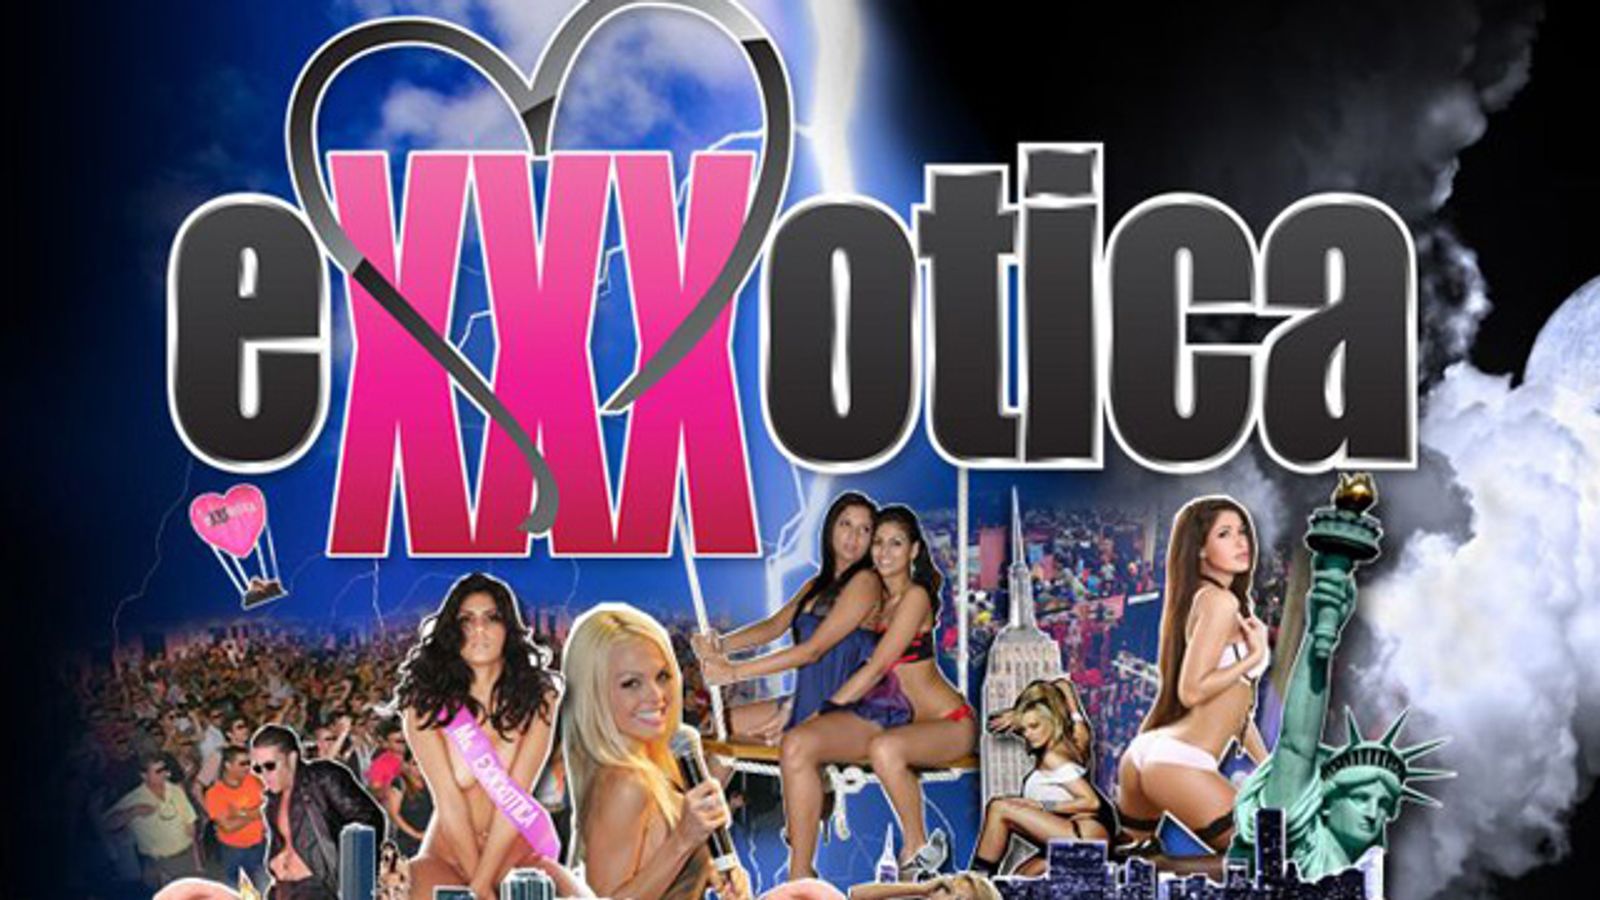 2010 New Jersey Exxxotica Reports Record Growth, Attendance